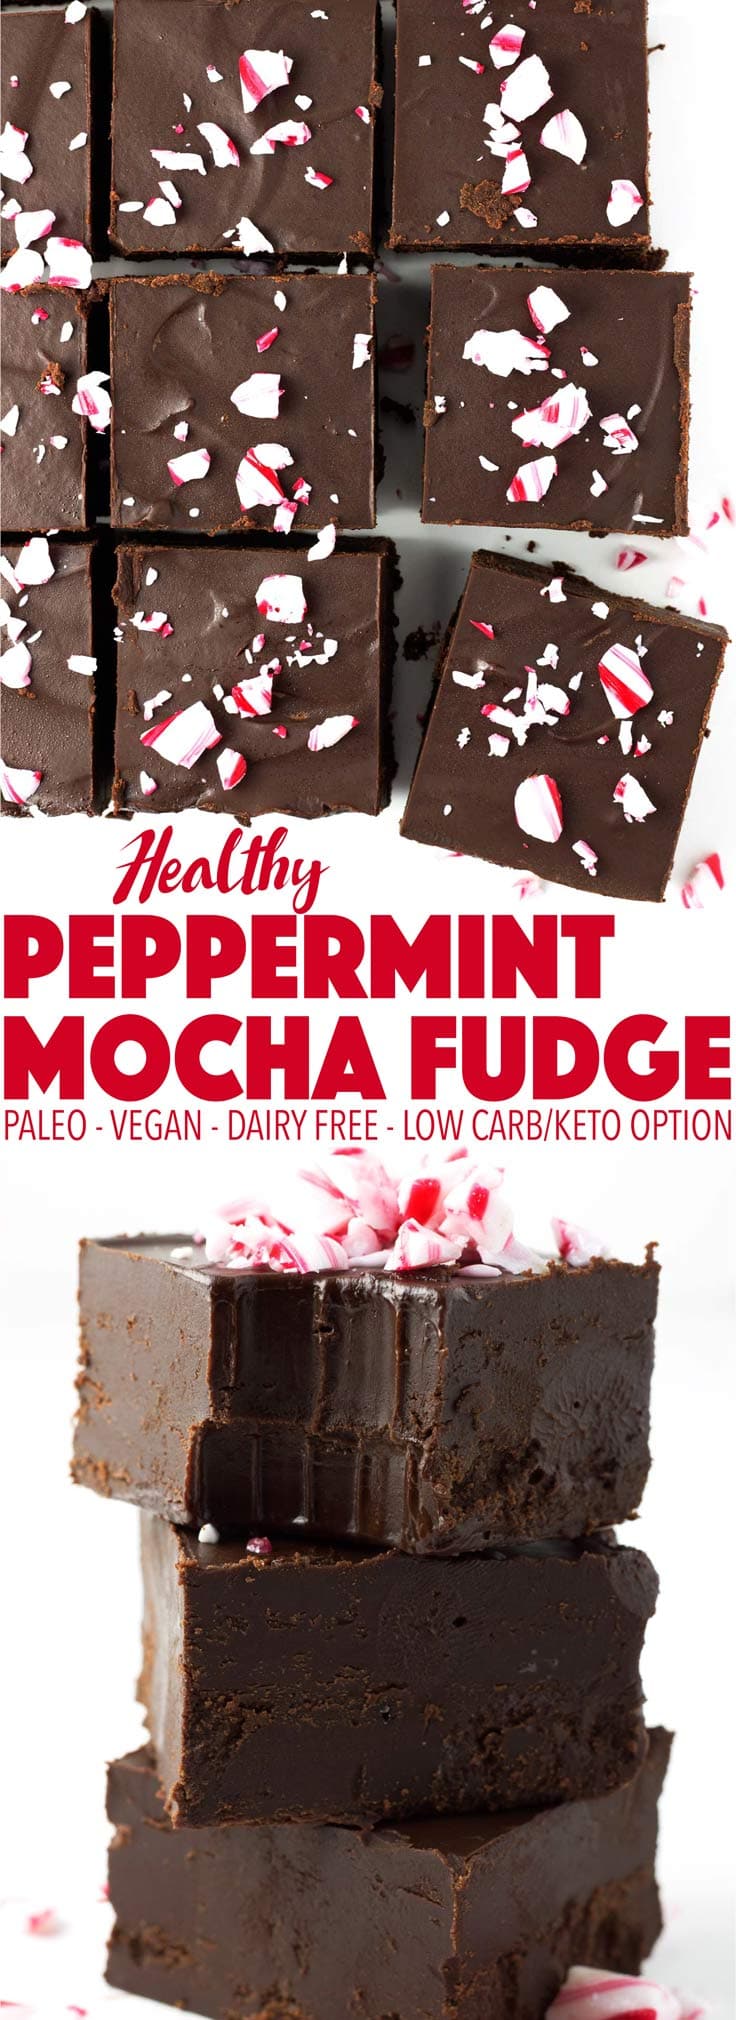 Easy to make and perfect for the holiday season! This peppermint mocha fudge is delicious as a Christmas dessert. It's paleo, vegan, dairy free, and can be made keto and low carb!